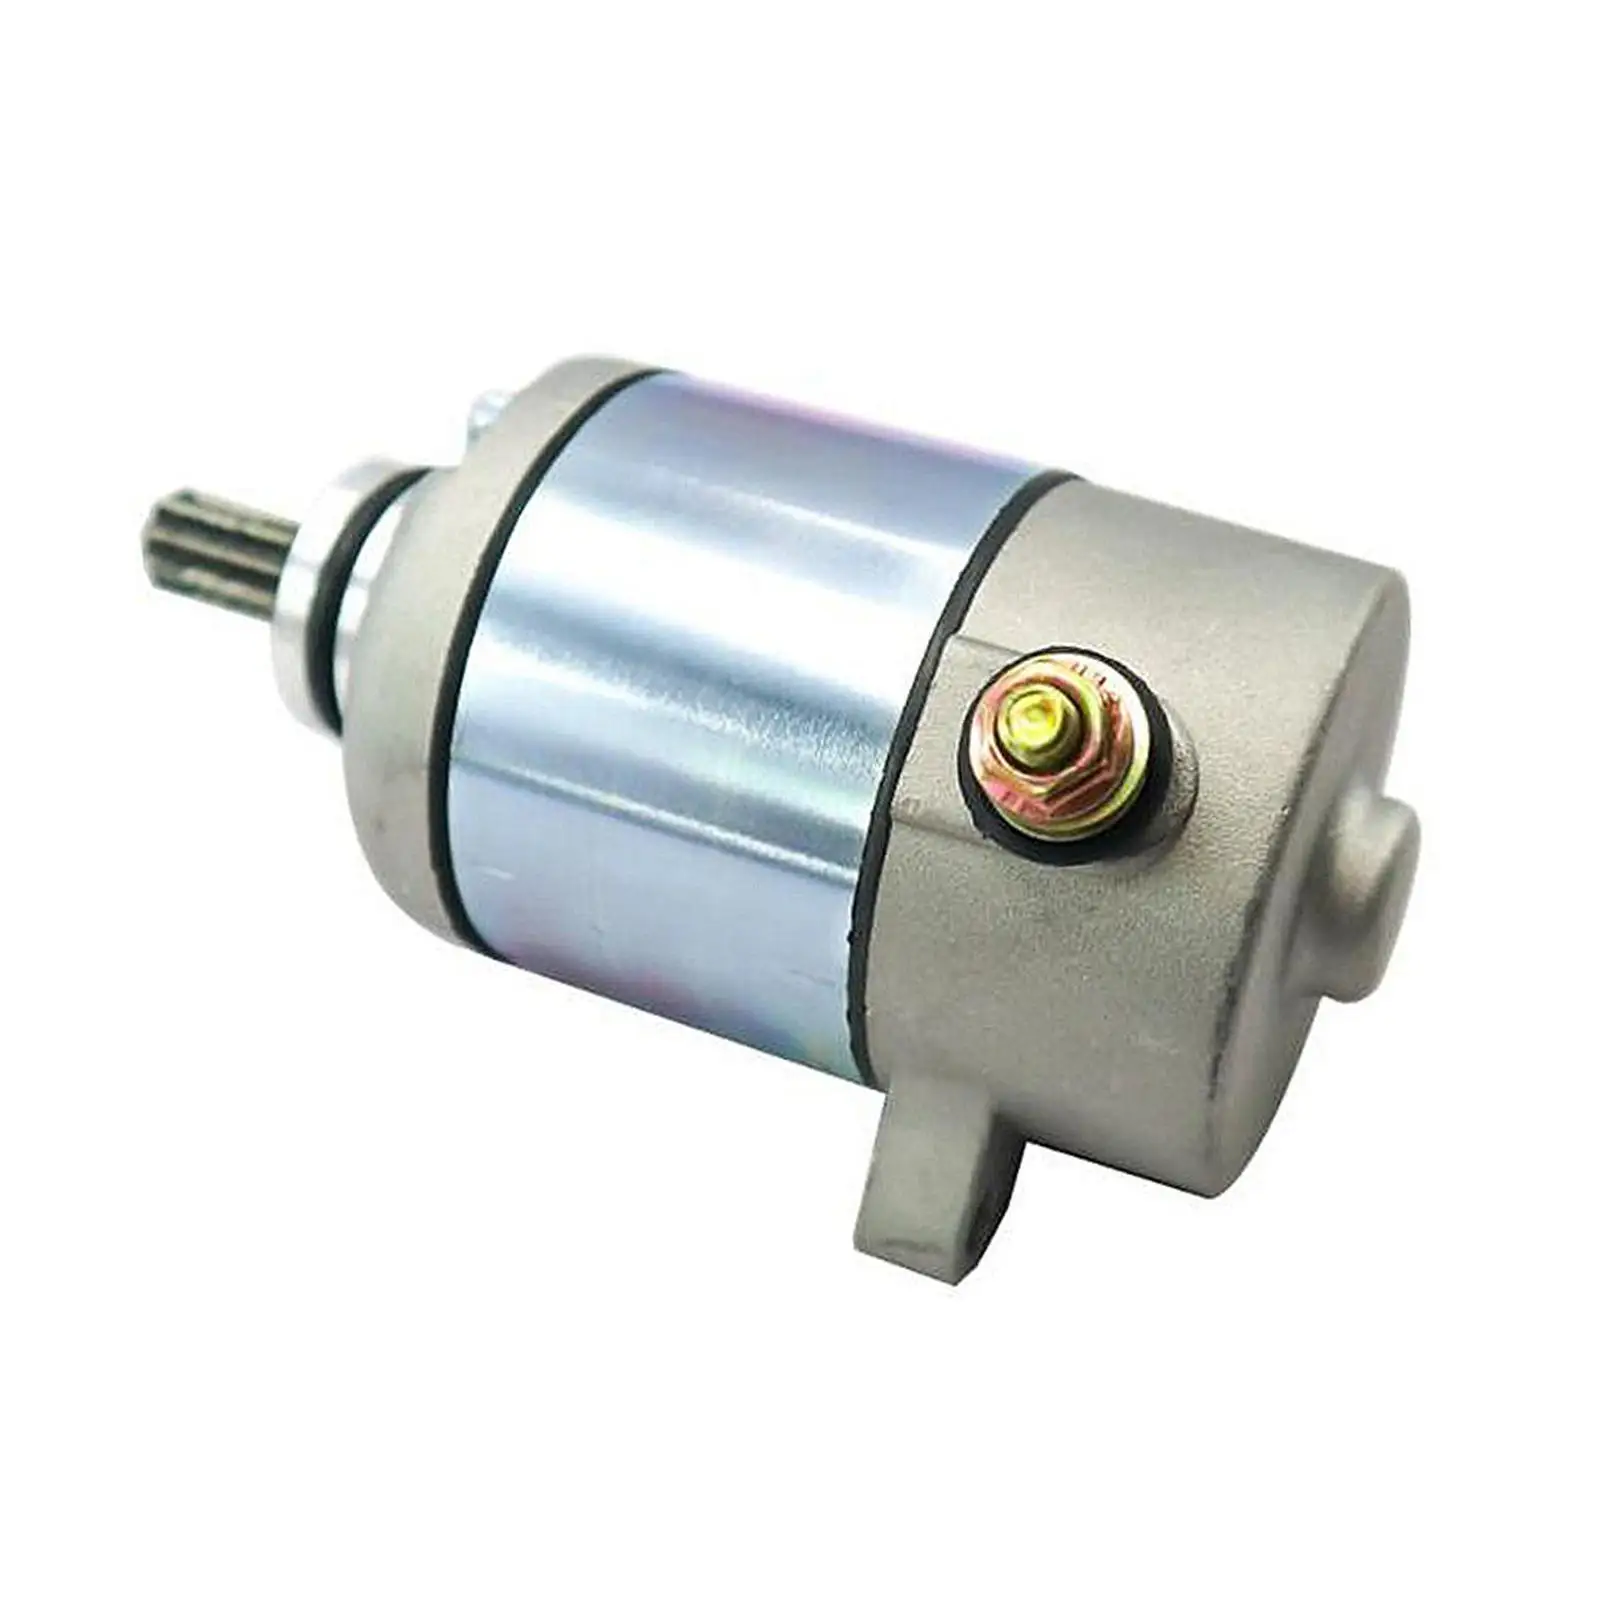 Electric Starter Motor Durable Premium High Performance Spare Parts Replacement Accessories for Honda Msx125 Wave 125